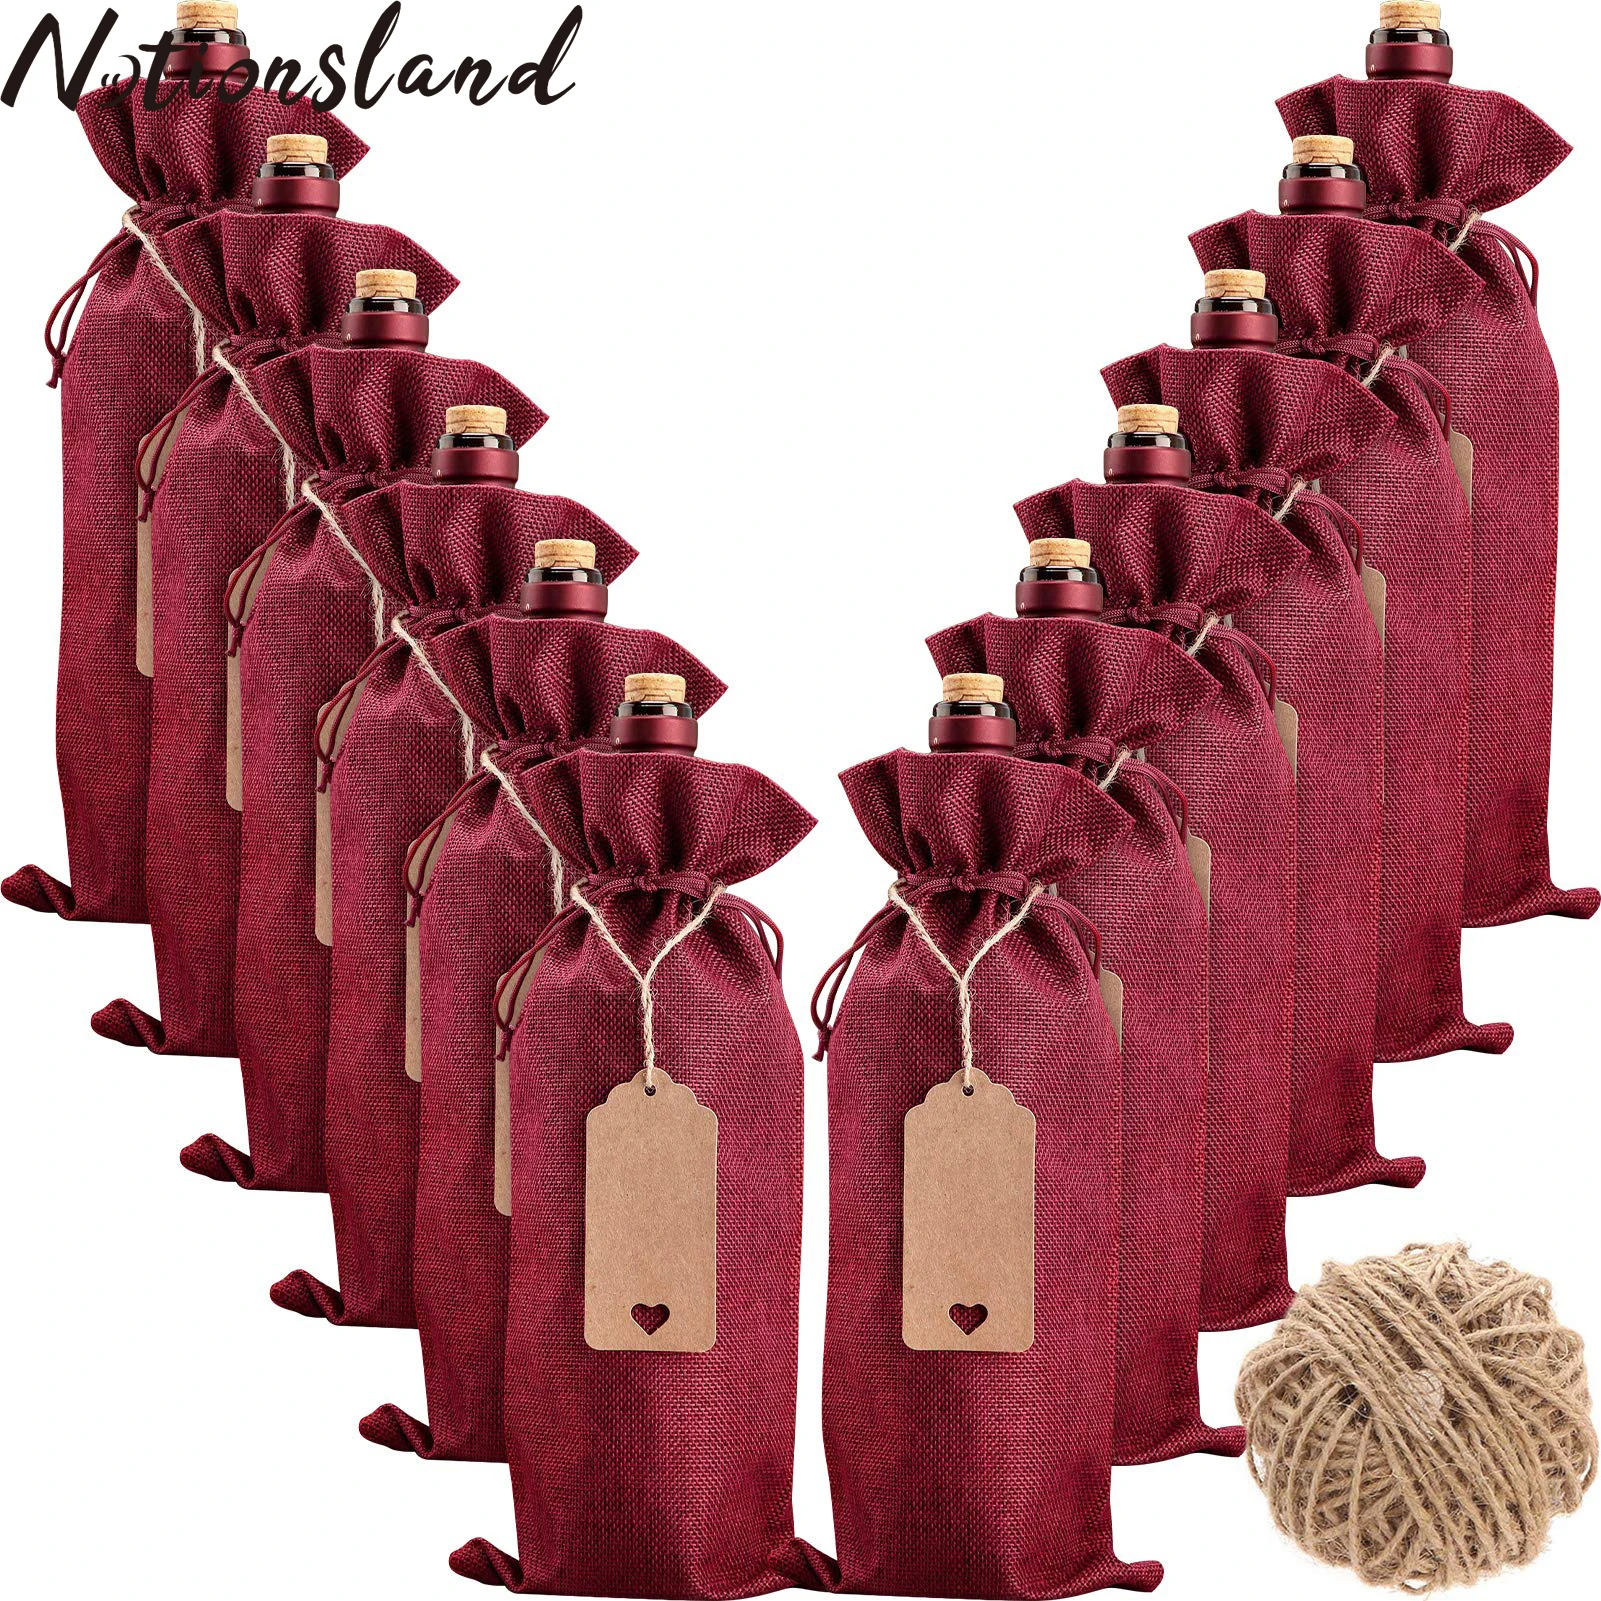 

12Pcs/Set Burlap Wine Bags Wine Gift Bags With Drawstrings Reusable Wine Bottle Bags For Christmas Wedding Birthday Travel Party